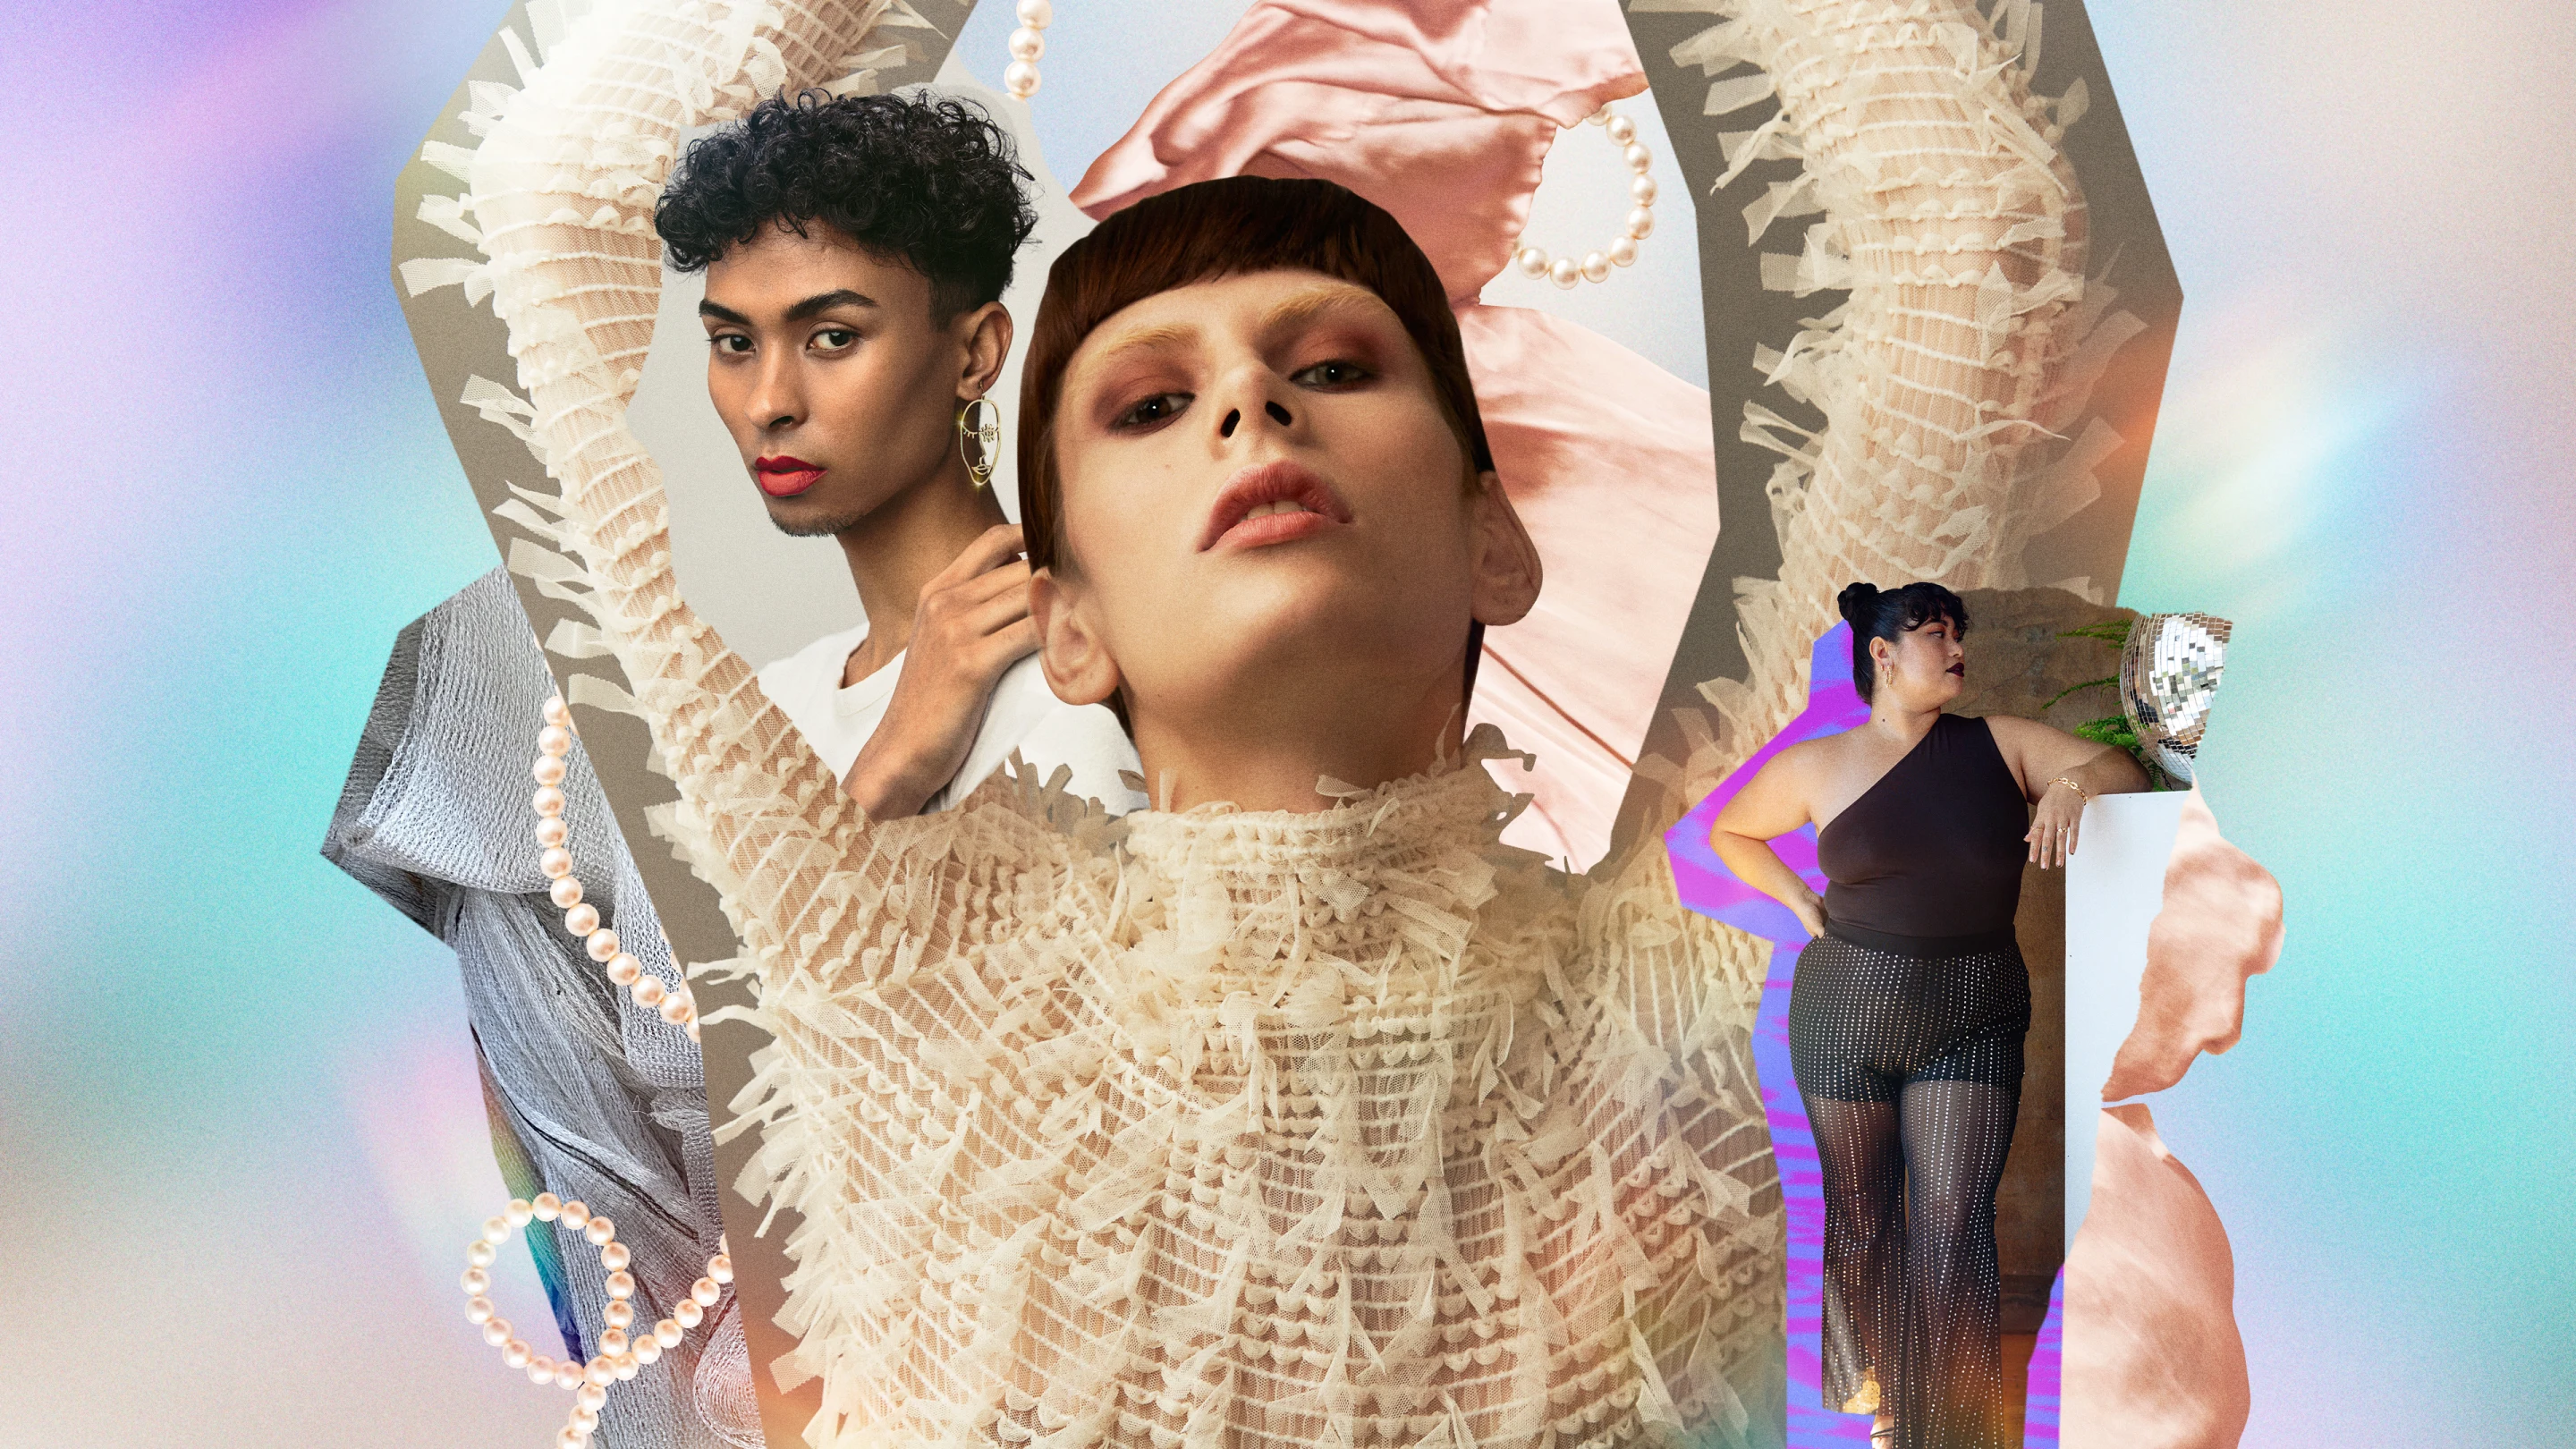 Ethereal collage featuring three people of various races and gender identities adorned in sensual, sparkly, free-flowing and gender agnostic clothing.